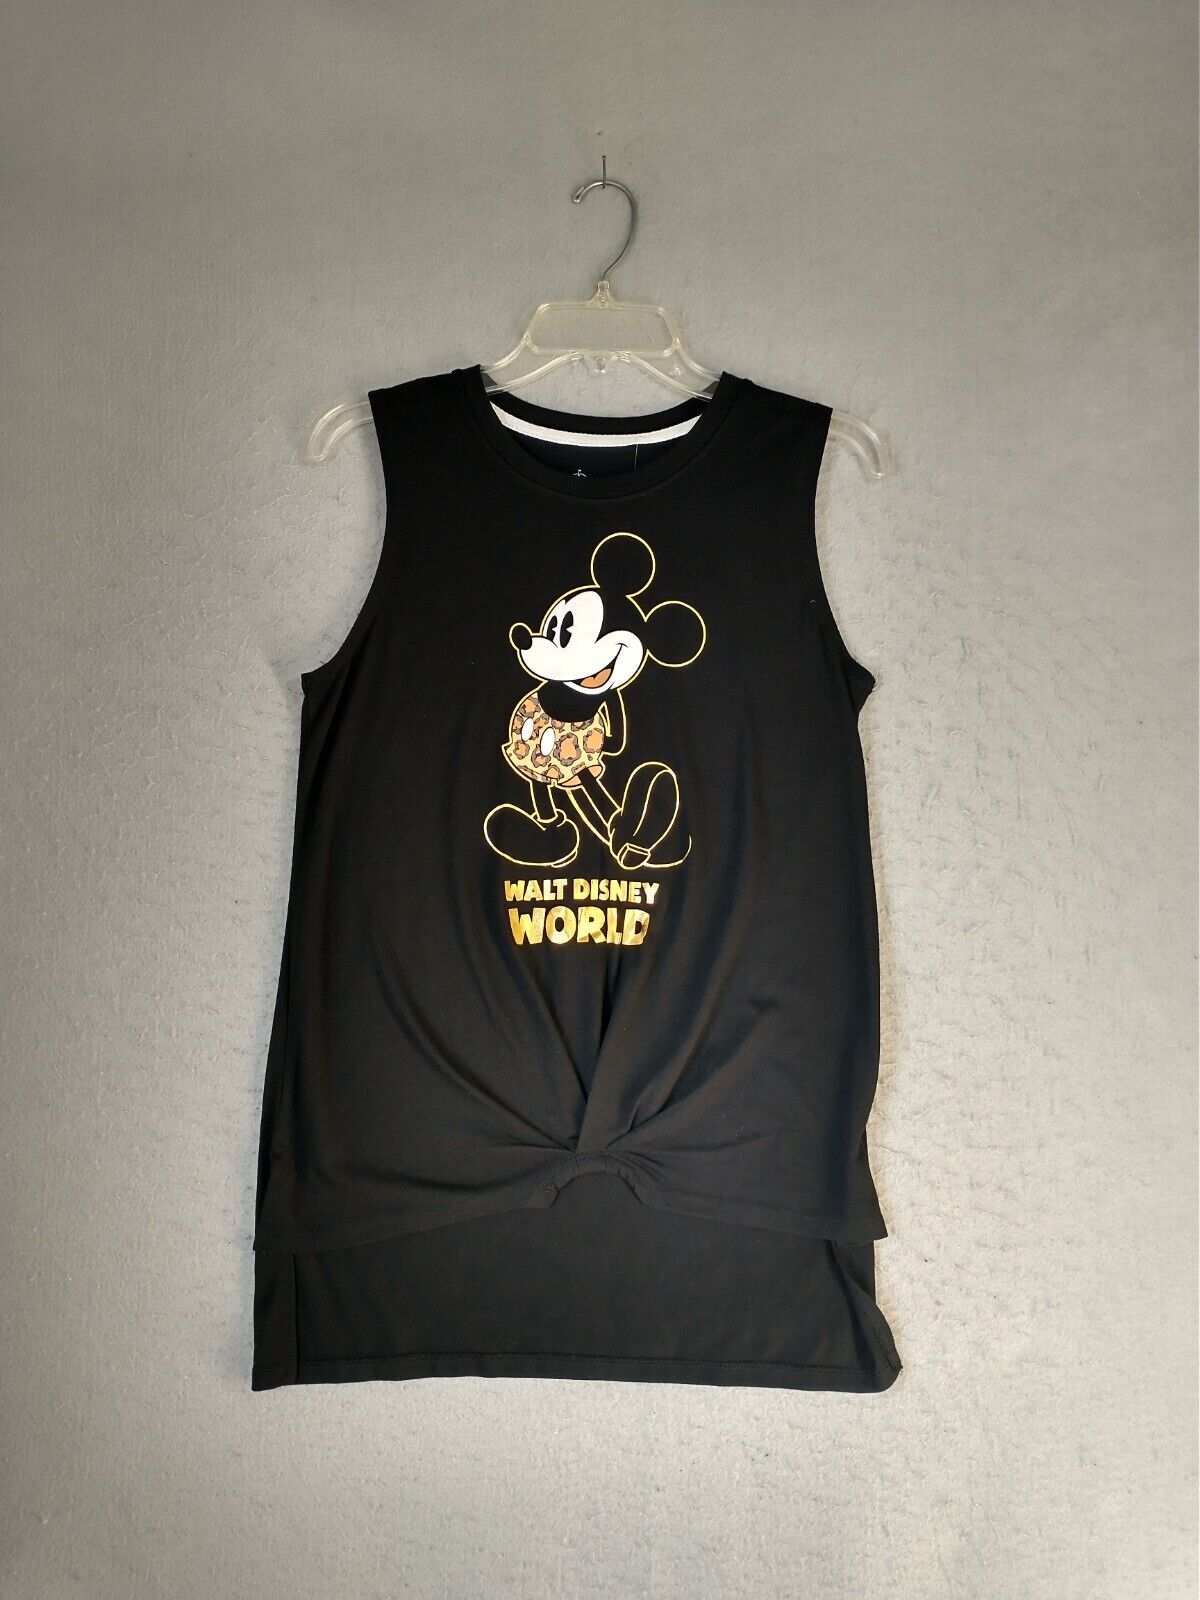 Disney Womens Top Small Black Mickey Mouse Sleeveless Round Neck Pullover Shirt